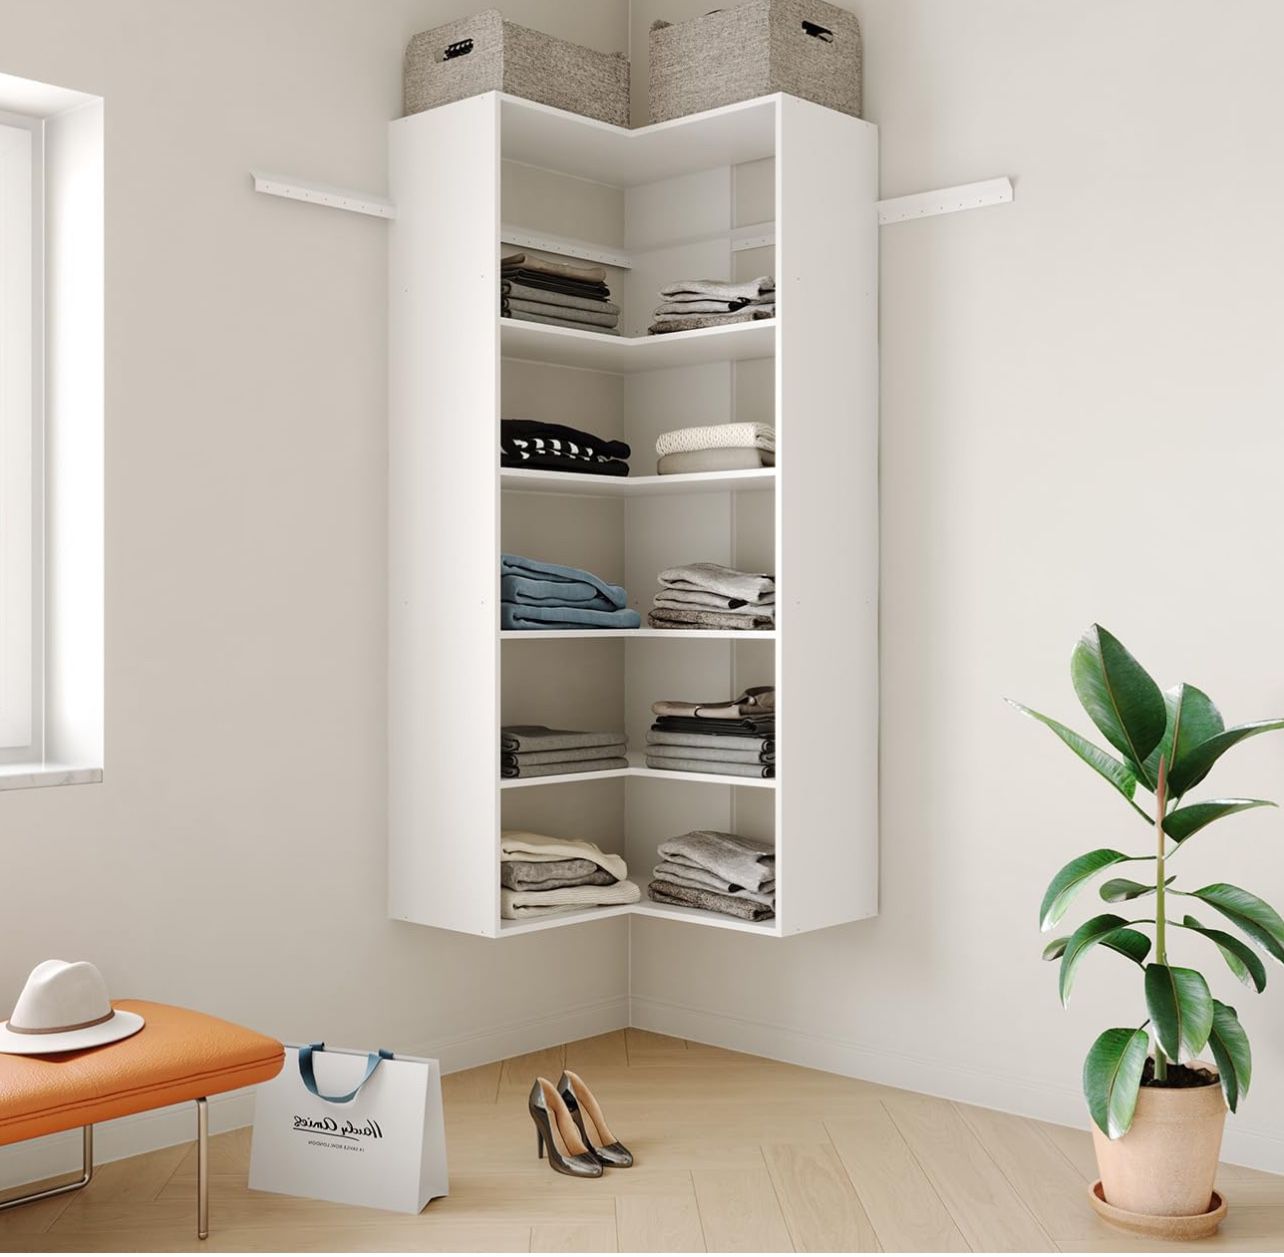 Closet System Corner Storage kit, with Hanging Rod and All Hardware Kits, Adjustable Shelves, Need to be Assembled, Manufactor Wood with White Color f